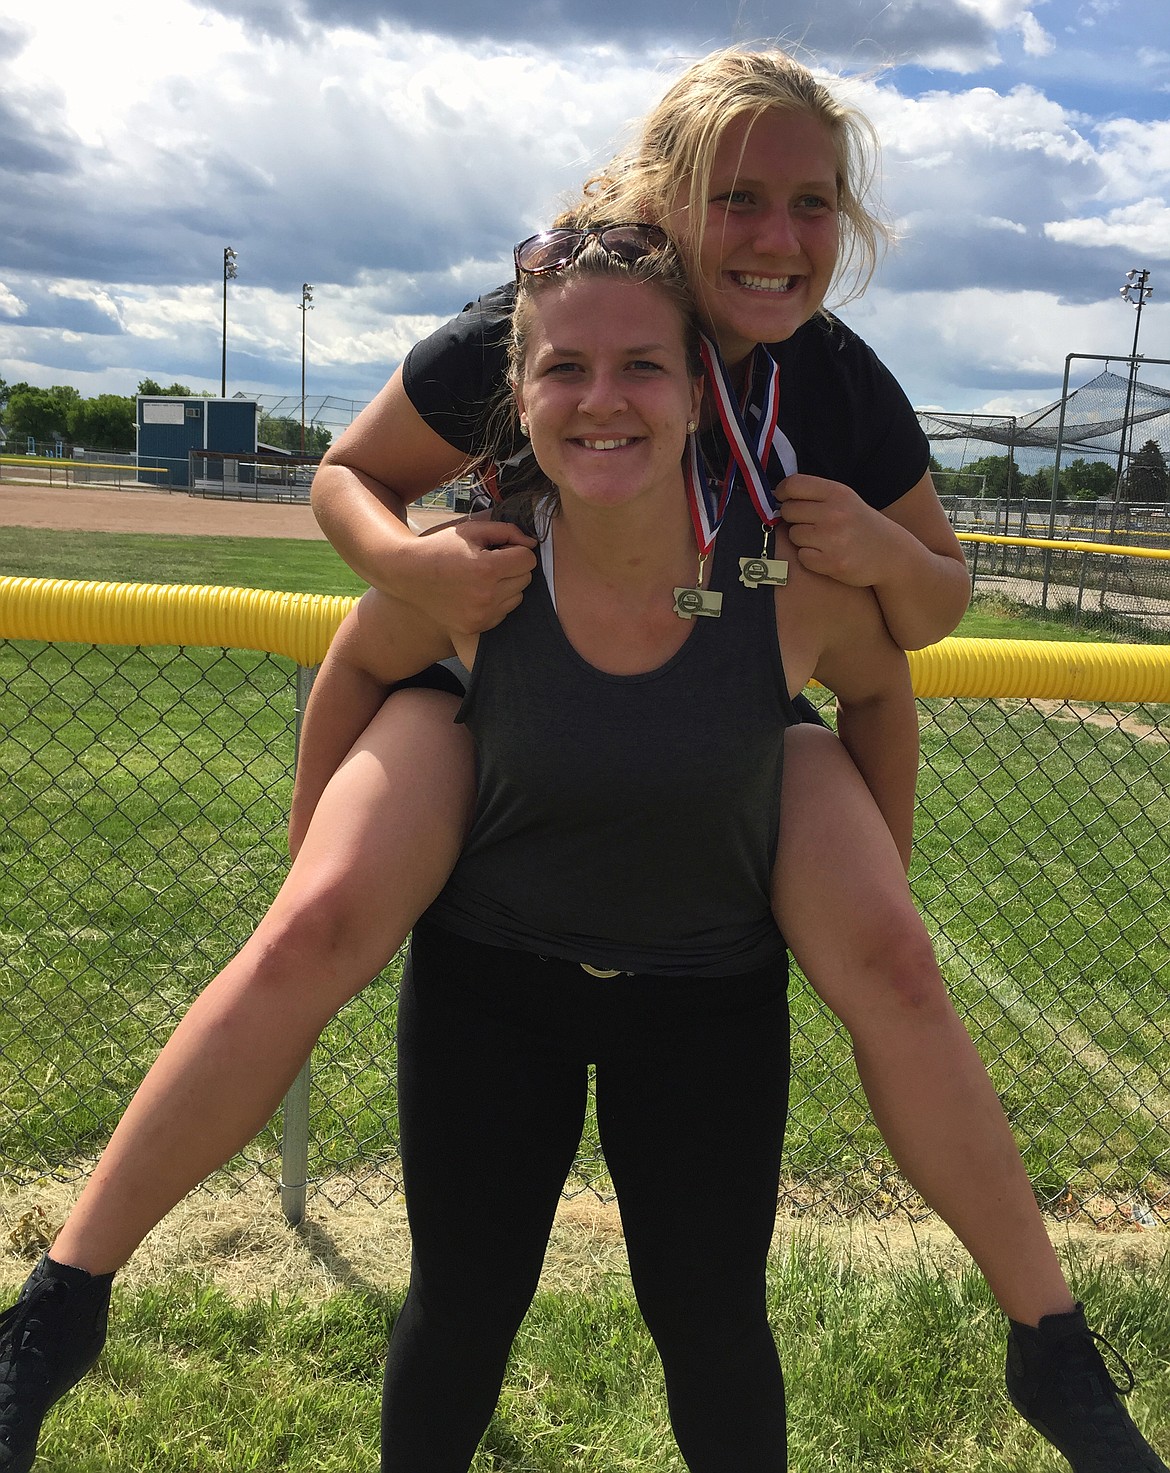 FORMER PLAINS Trotters Jessica Thompson (top) embraces her sister Leah Thompson (bottom) during the 2017 MHSA track tournament. (photo courtesy of Denise Montgomery)